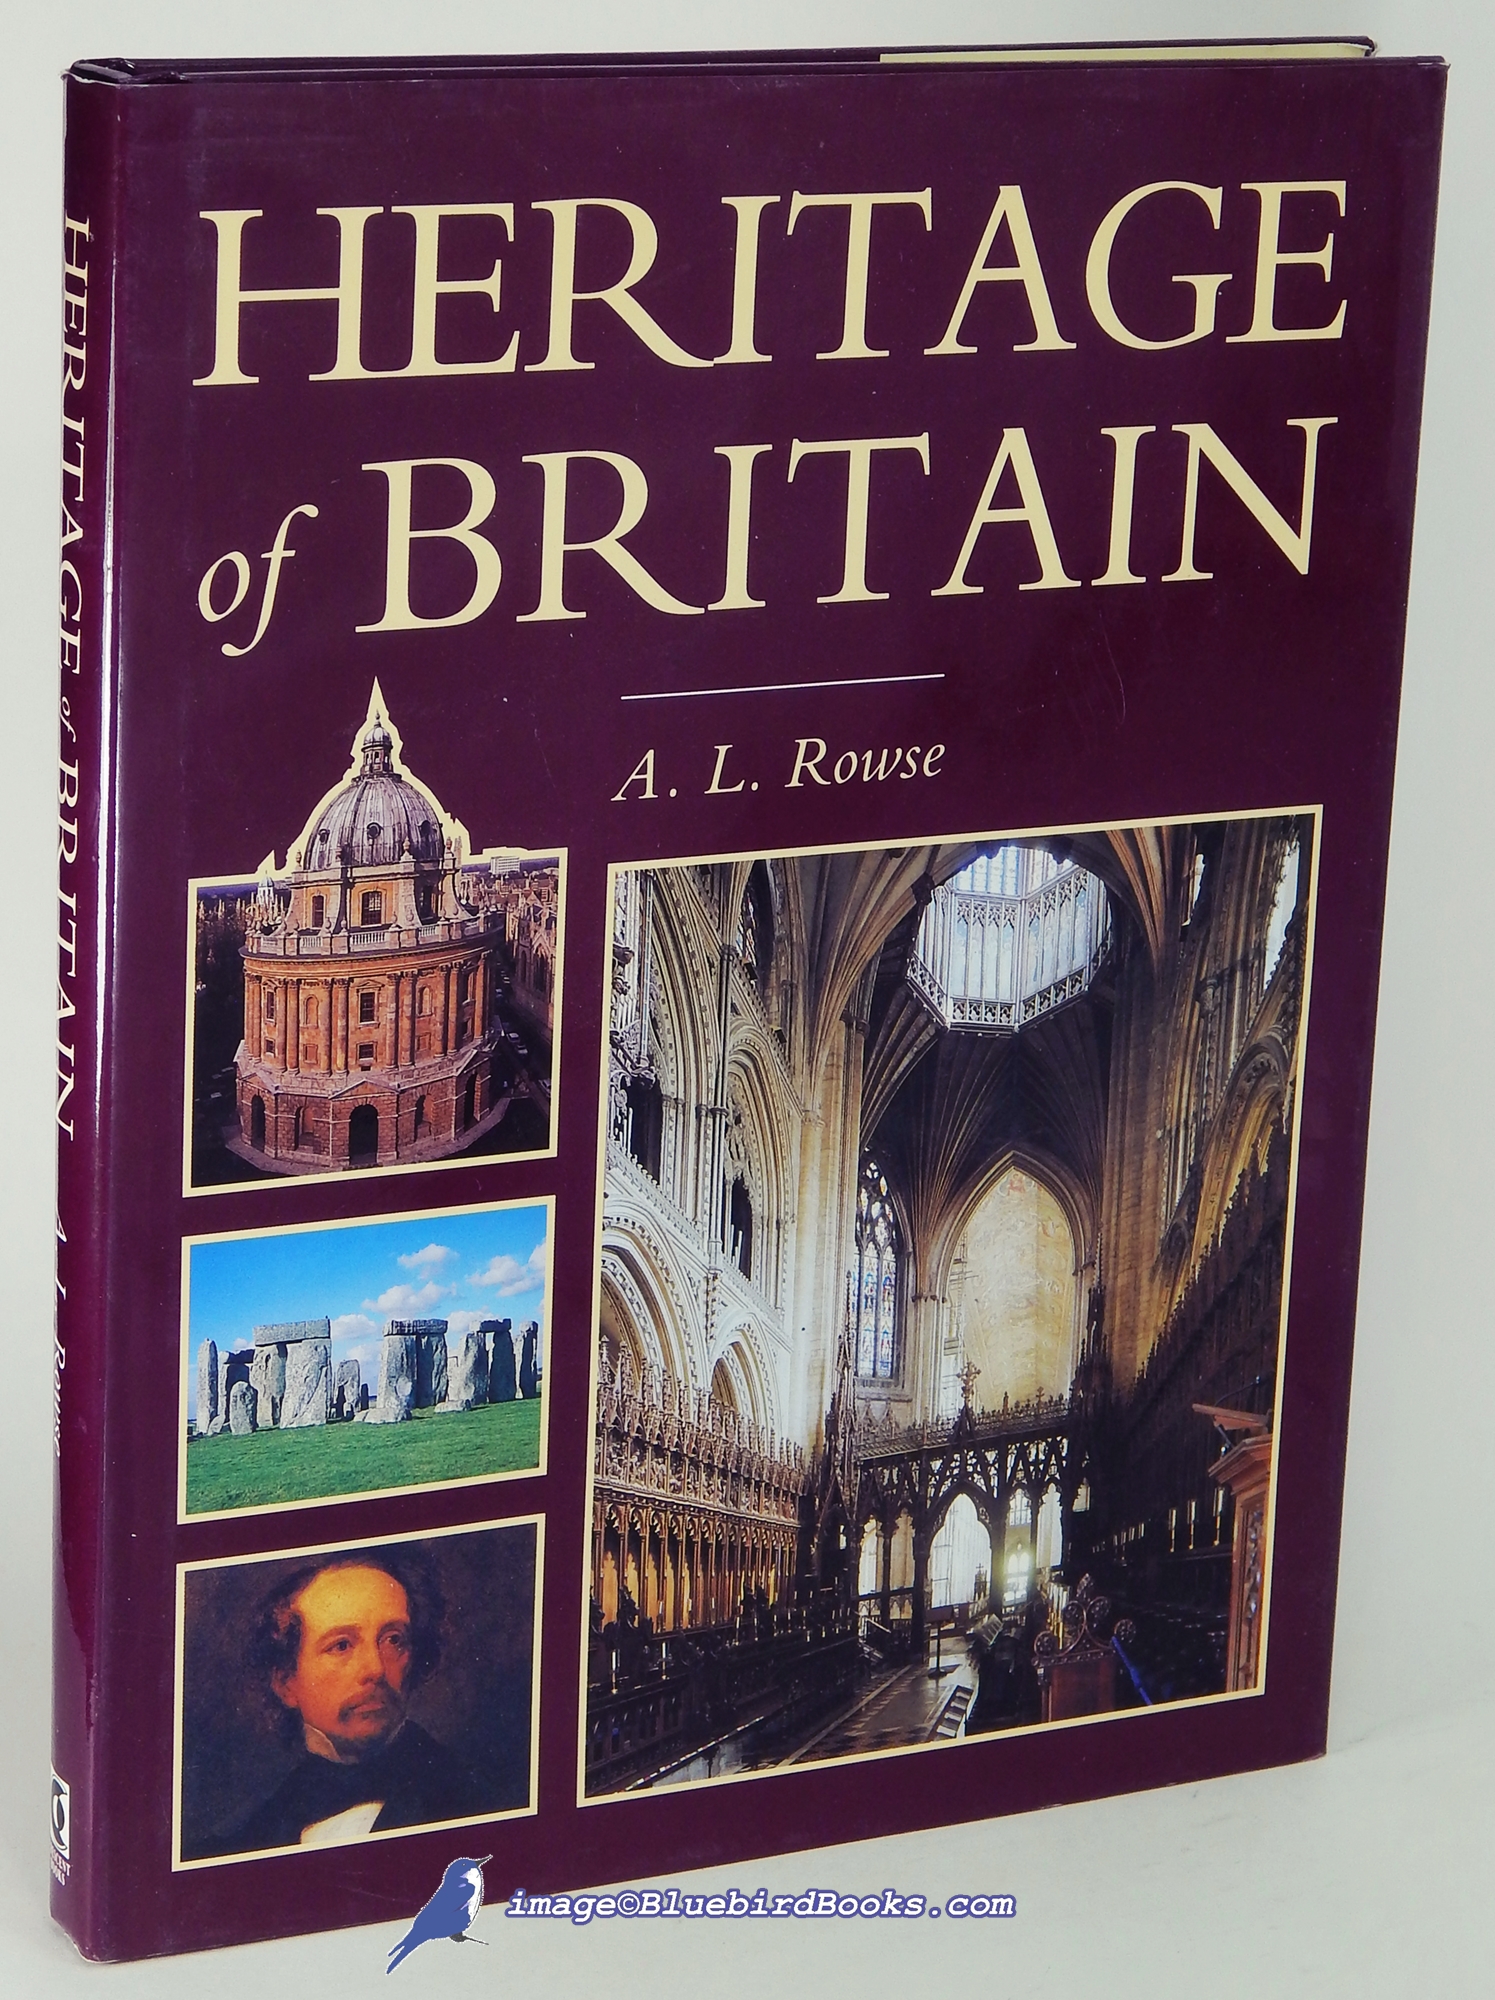 ROWSE, A. L. - Heritage of Britain